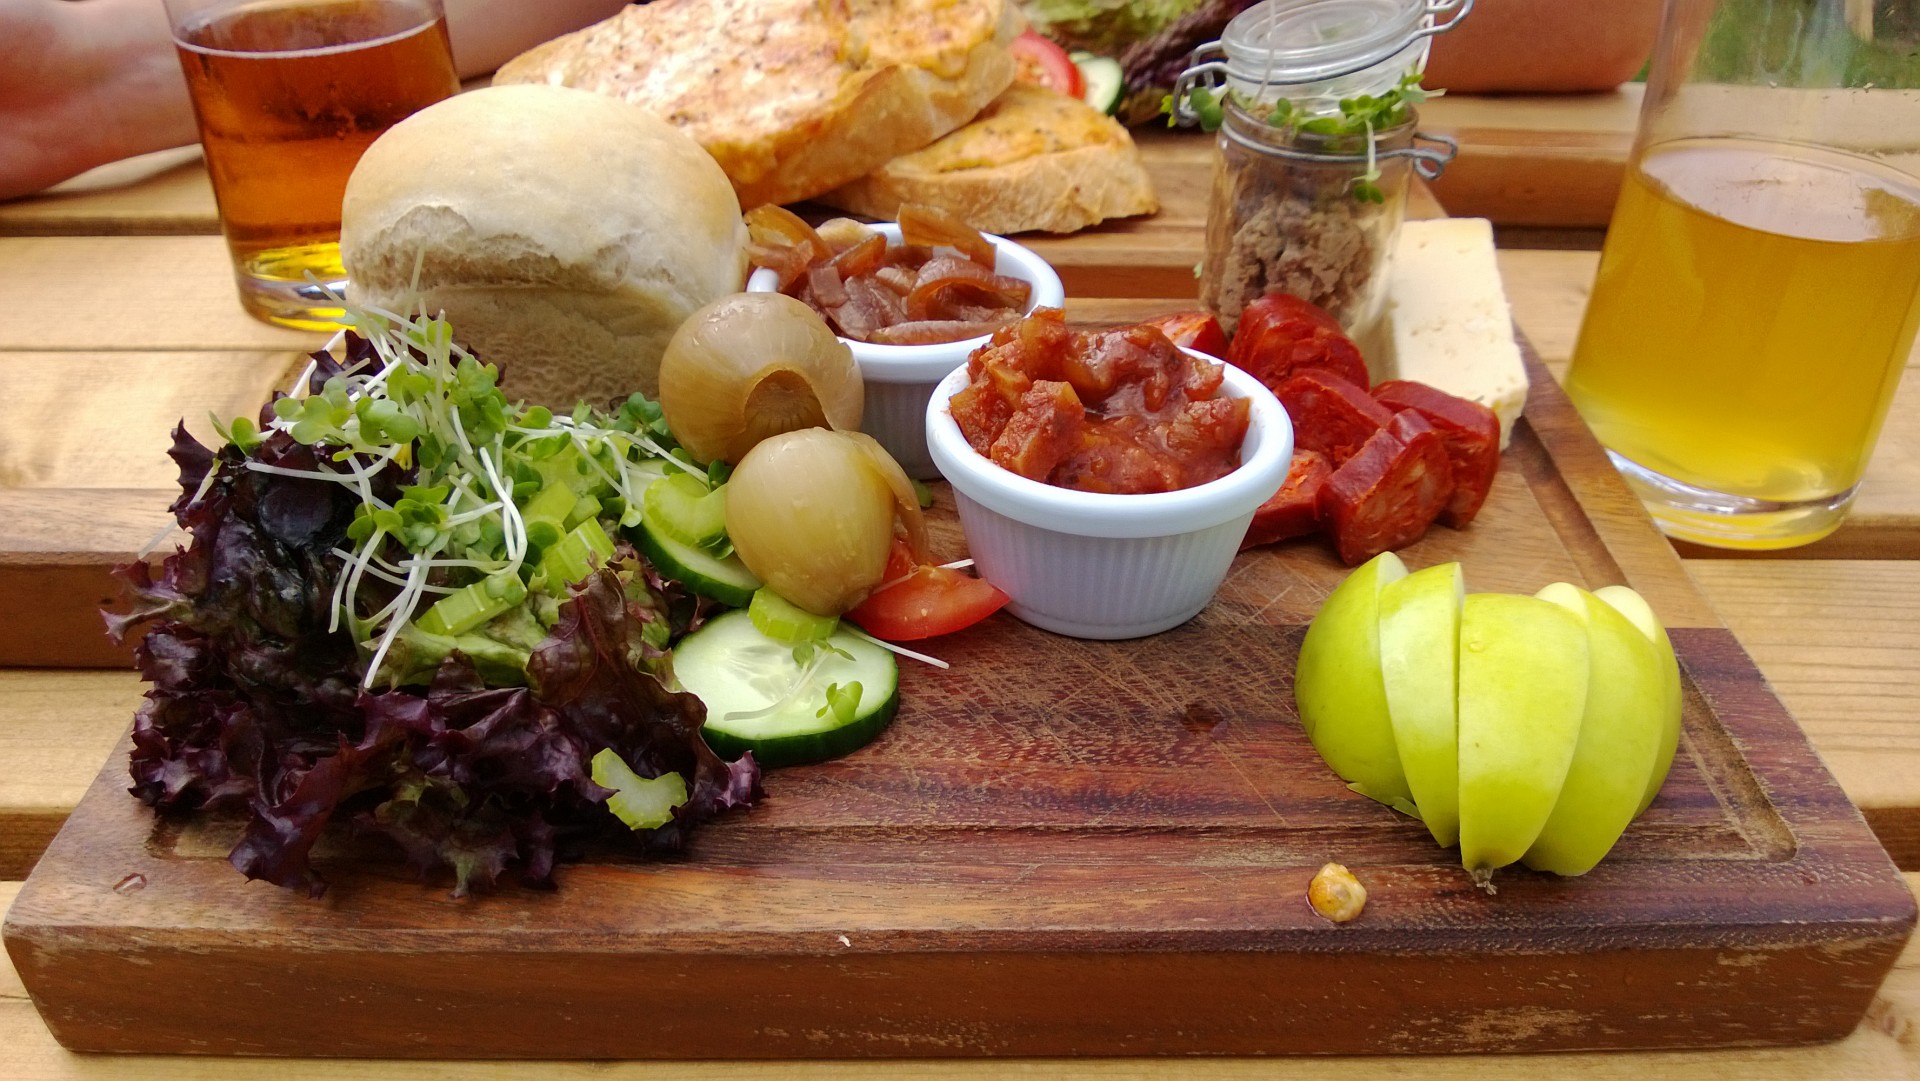 A delicious ploughmans pub lunch, with a twist, in the New Forest